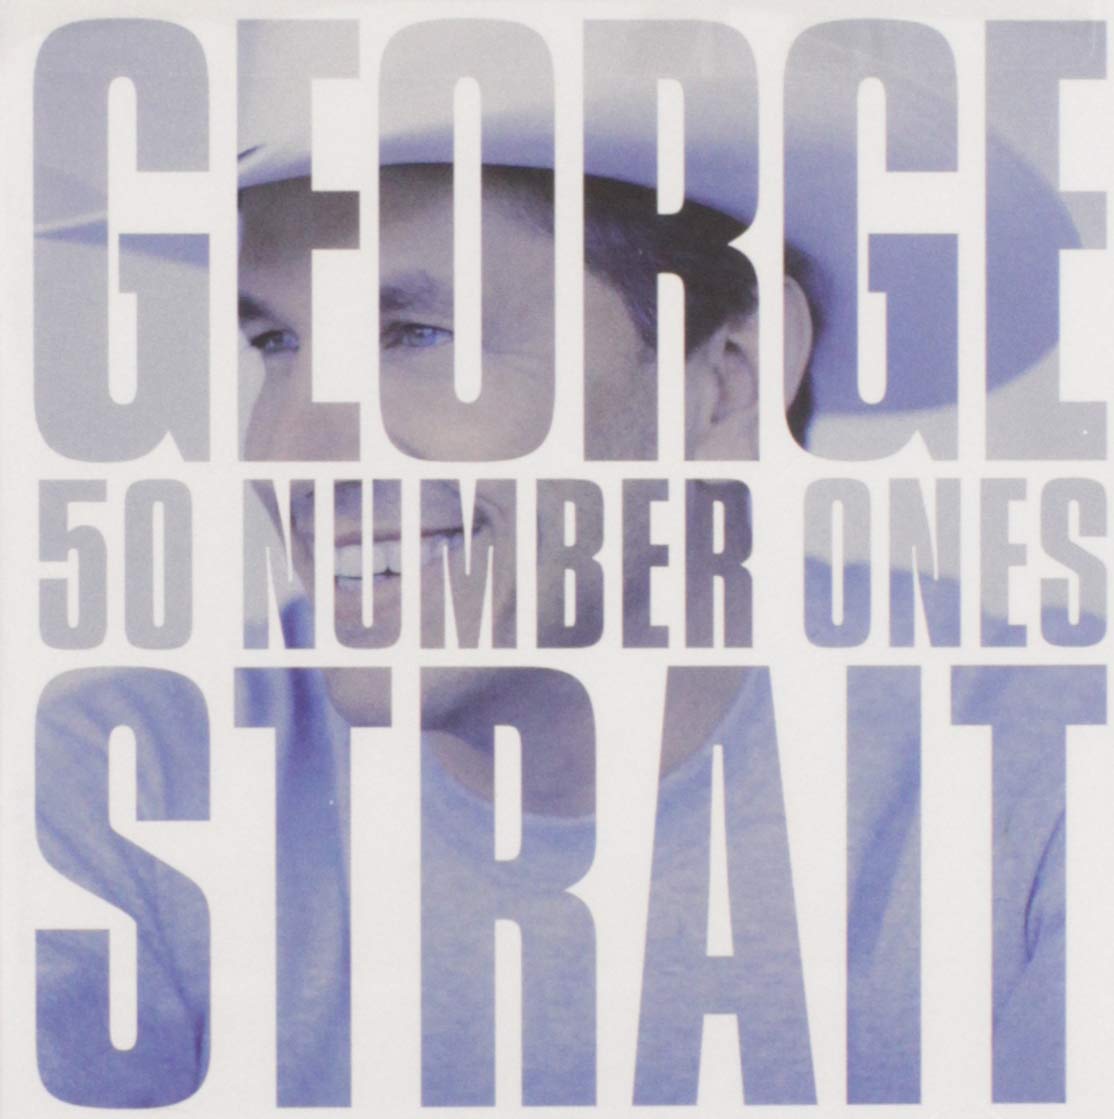 Art for Living And Living Well by George Strait